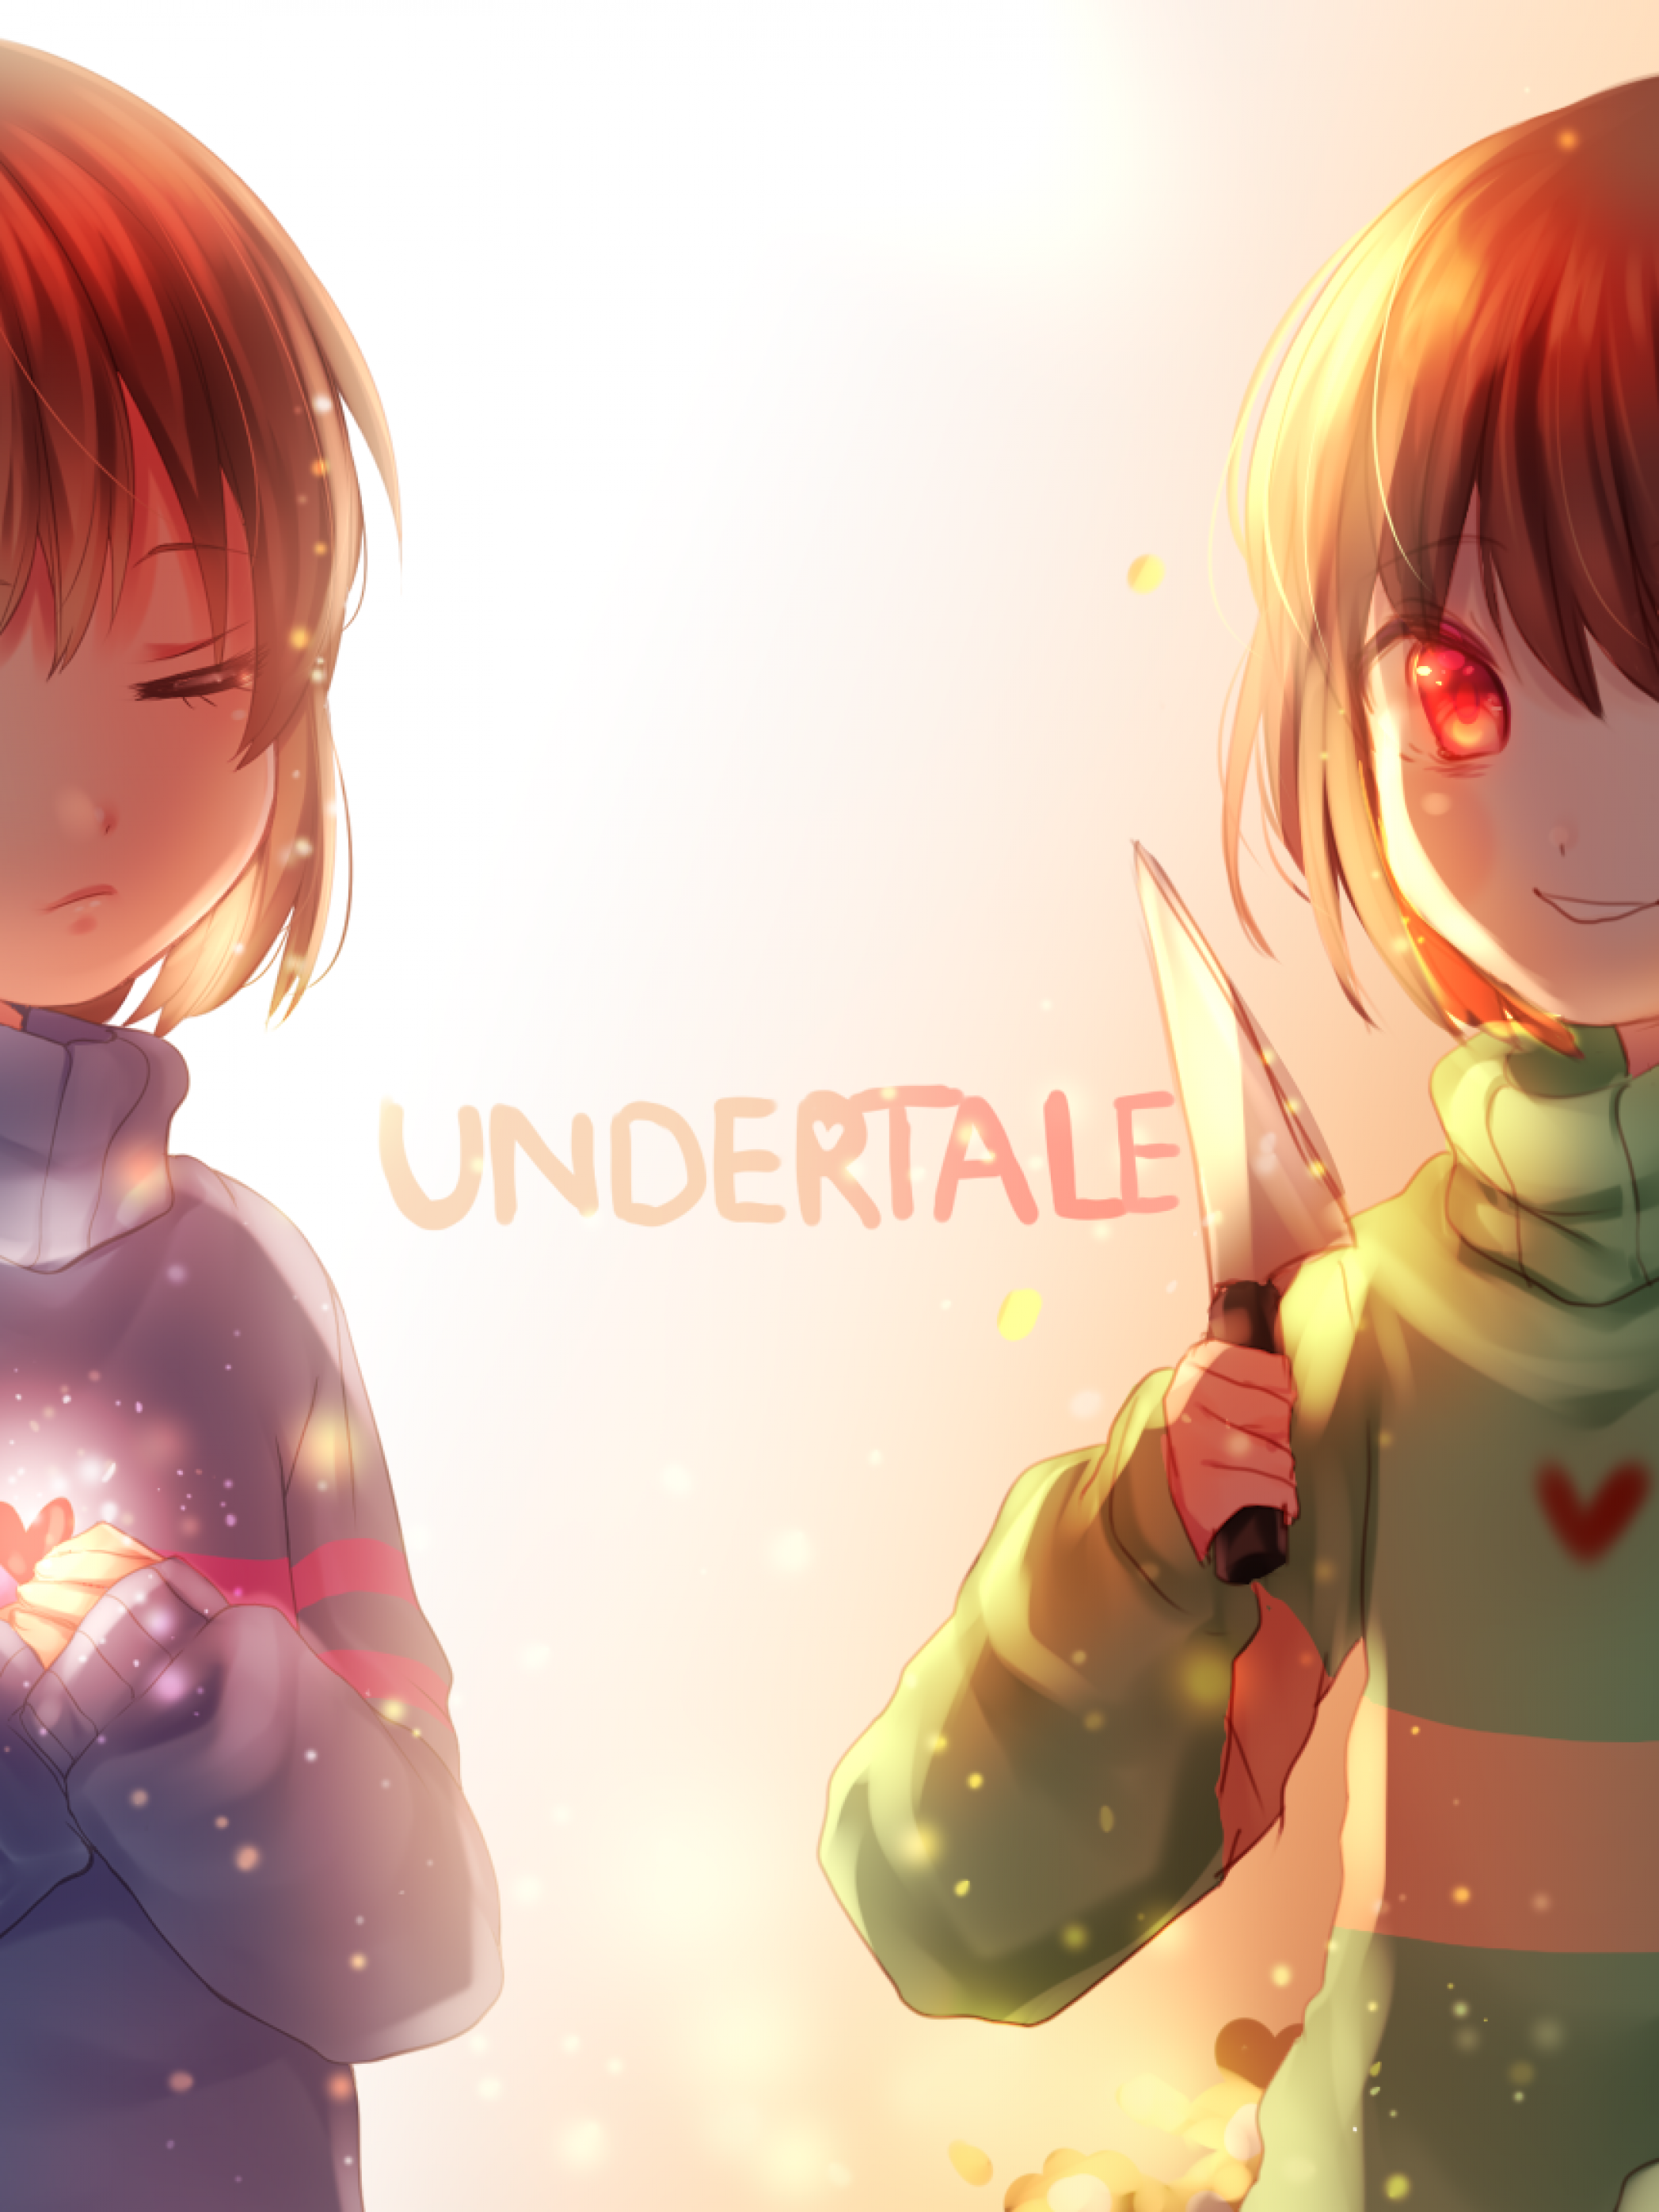 Download 2095x2793 Undertale, Frisk, Chara, Anime Style Wallpaper